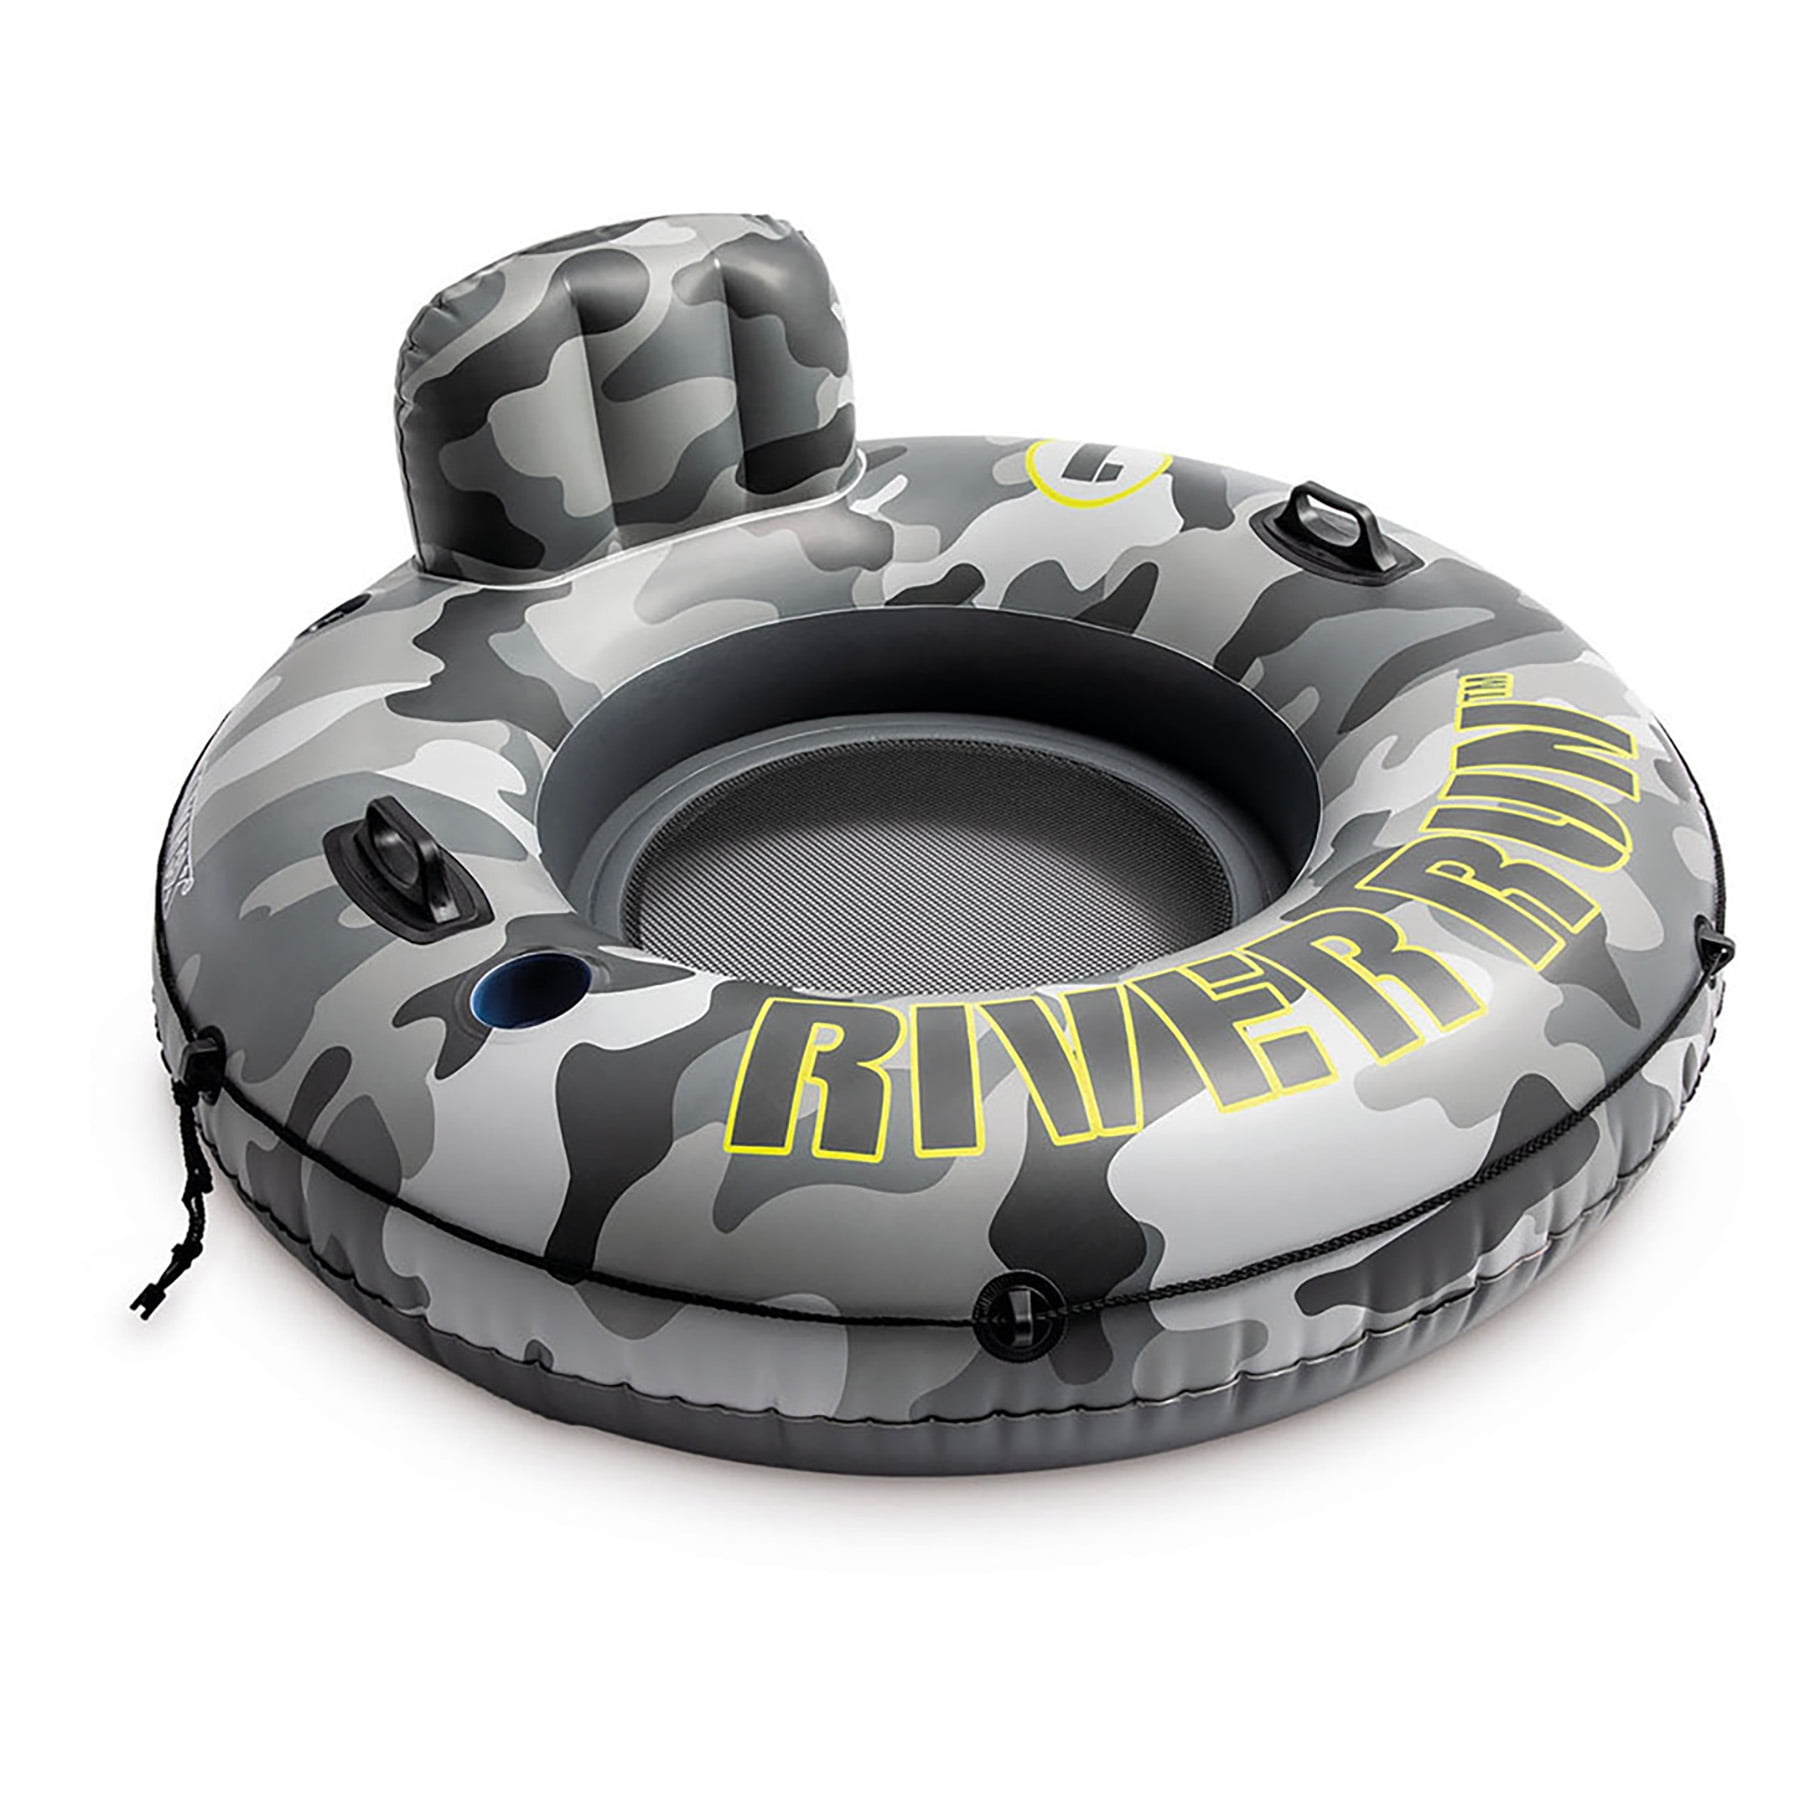 53" Intex River Run Inflatable Pool Float w/ Cup Holder (Camo) $16 + Free Shipping w/ Walmart+ or on $35+